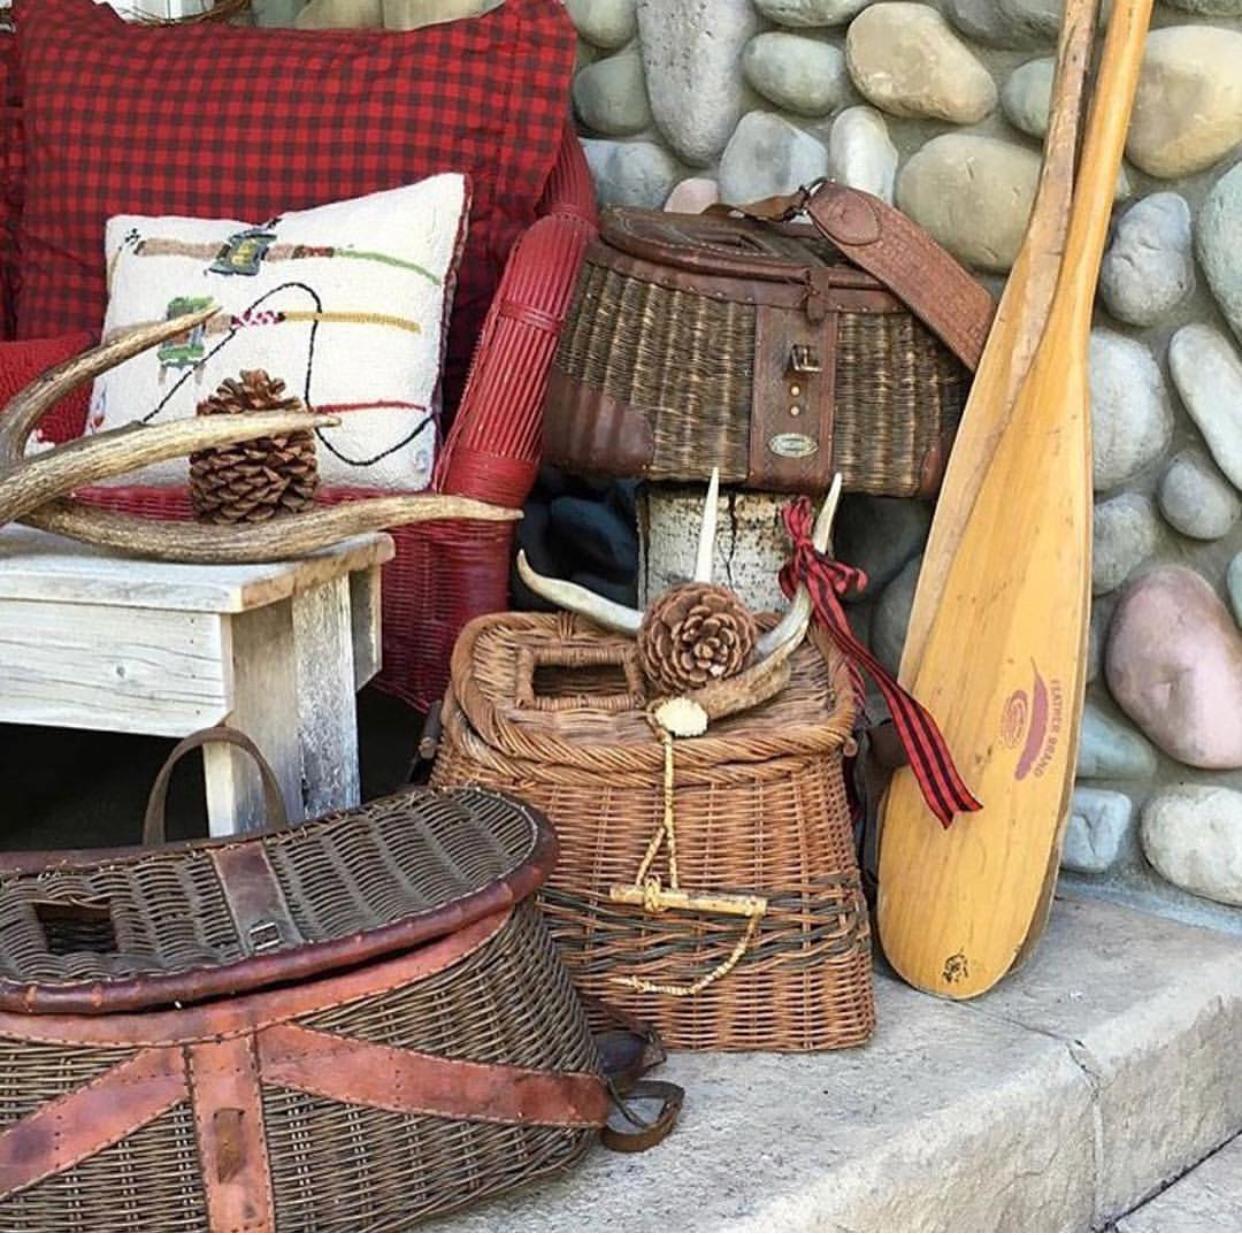 fishing creels, paddle, cabin, cottage, rustic decor